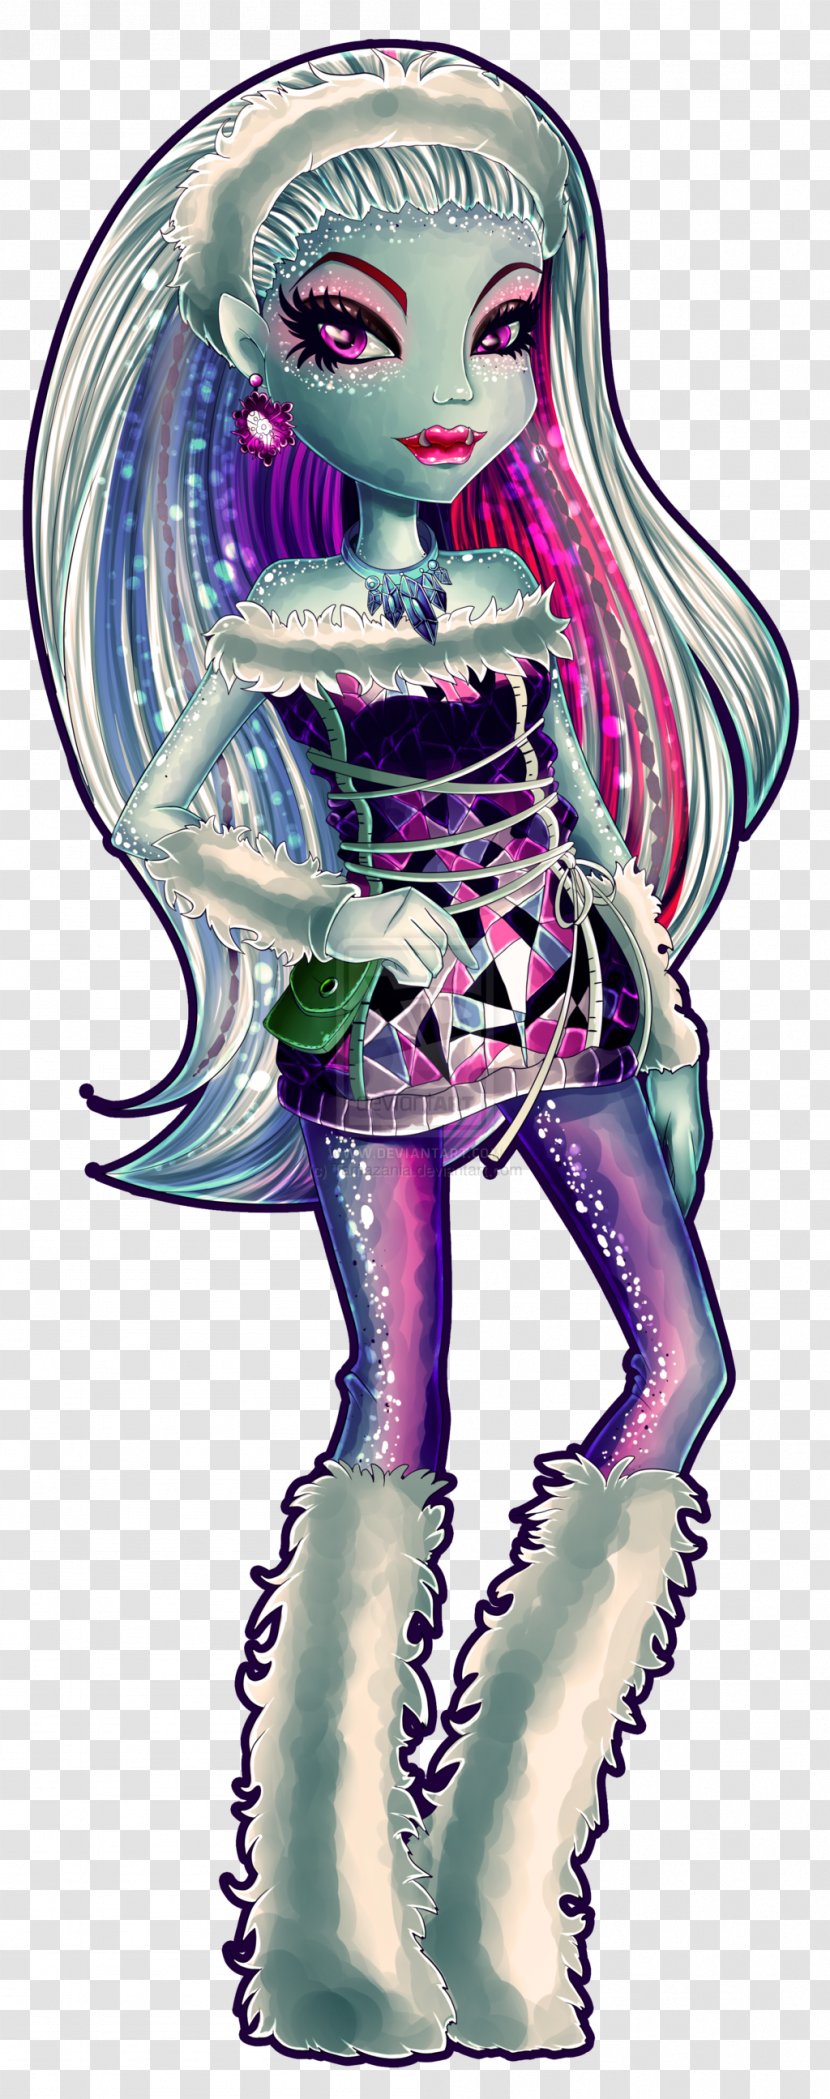 Illustration Cartoon Legendary Creature Organism Doll - Fictional Character - Abbey Bominable Monster High Transparent PNG